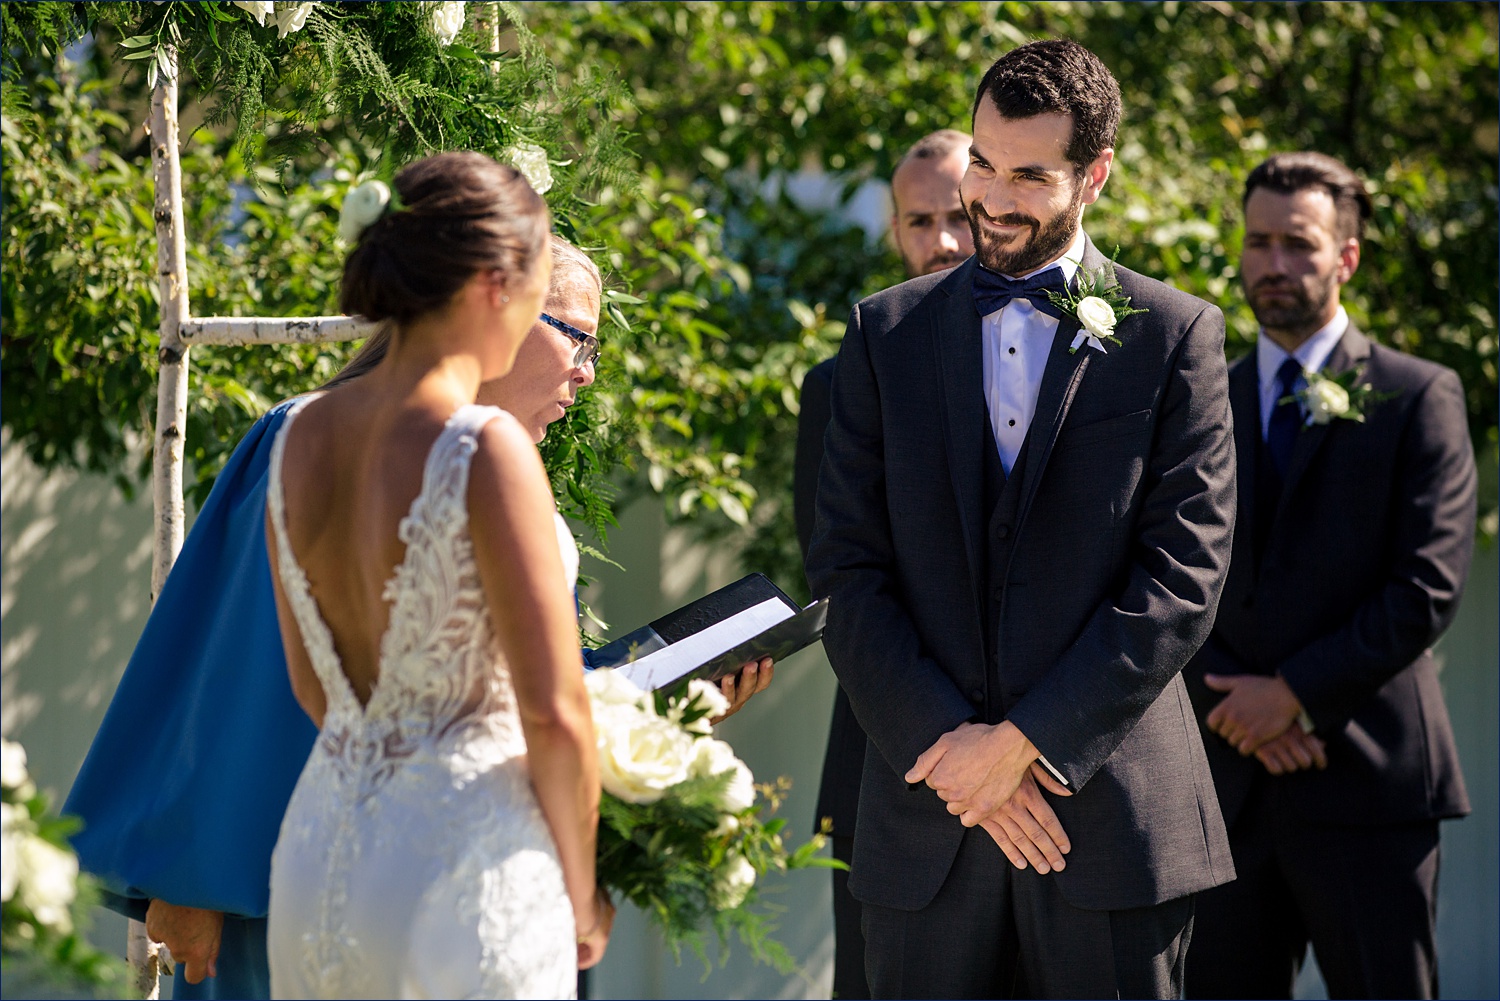 The groom steals a smile at the bride at their garden wedding in NH